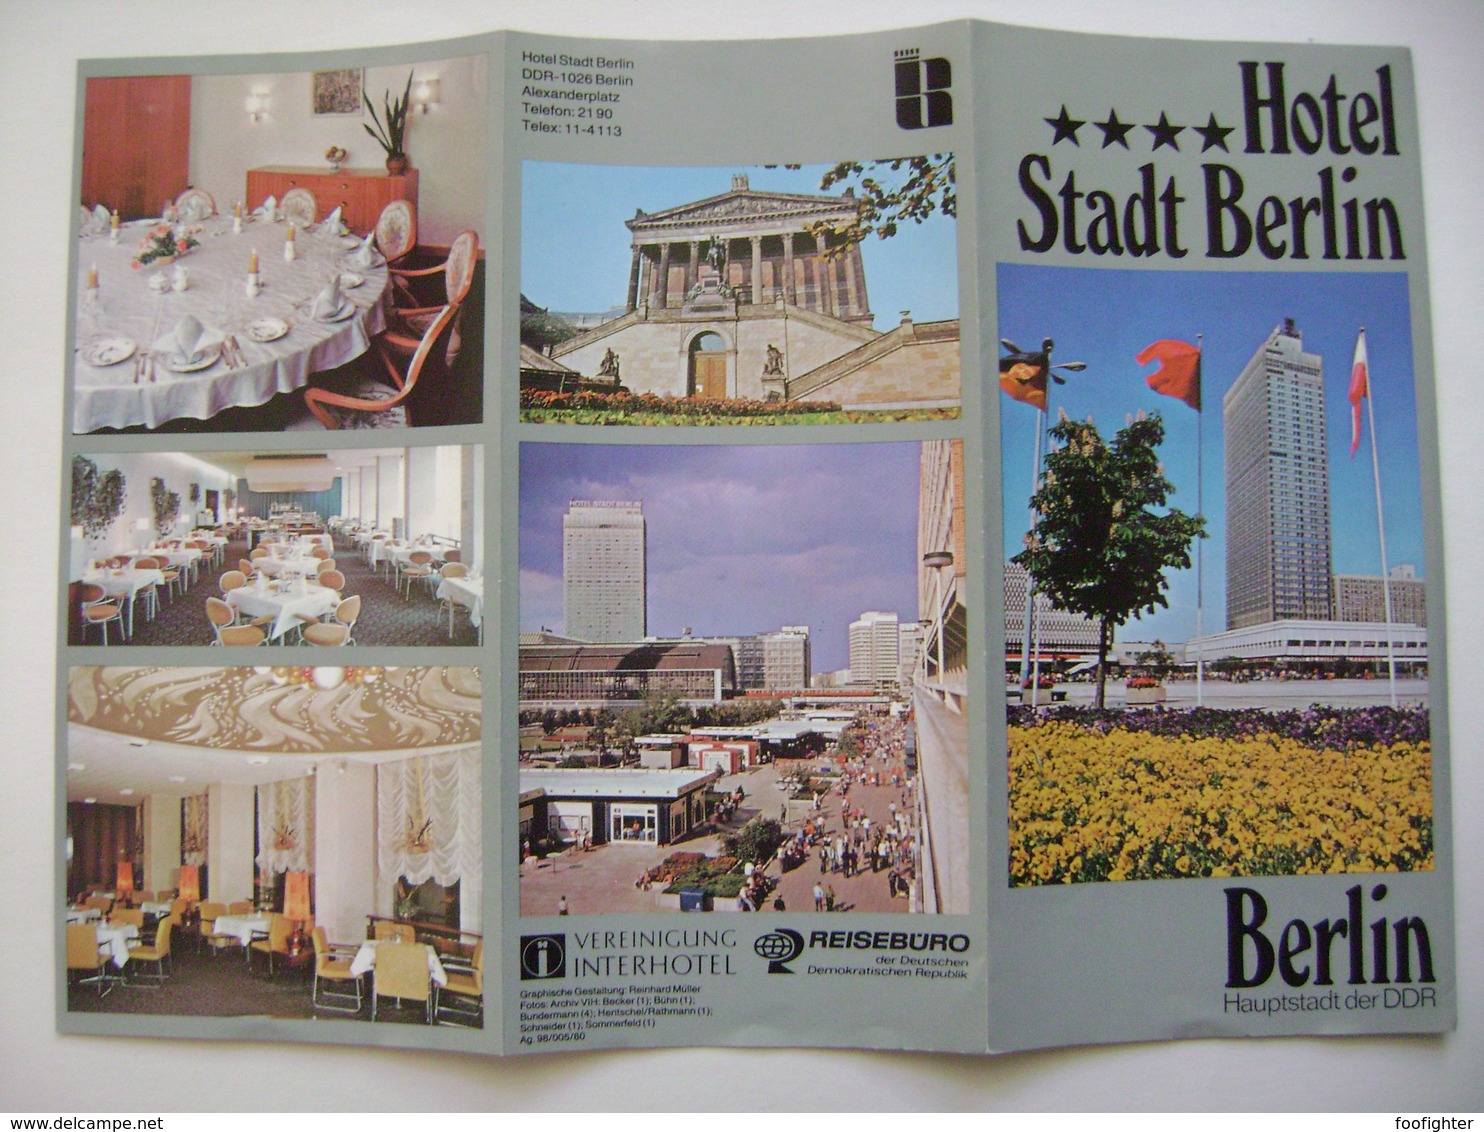 Germany DDR - Hotel Stadt Berlin 1980s - Advertising Guide In 4 Languages, Pictures Interior, 6 Pages - Berlin & Potsdam